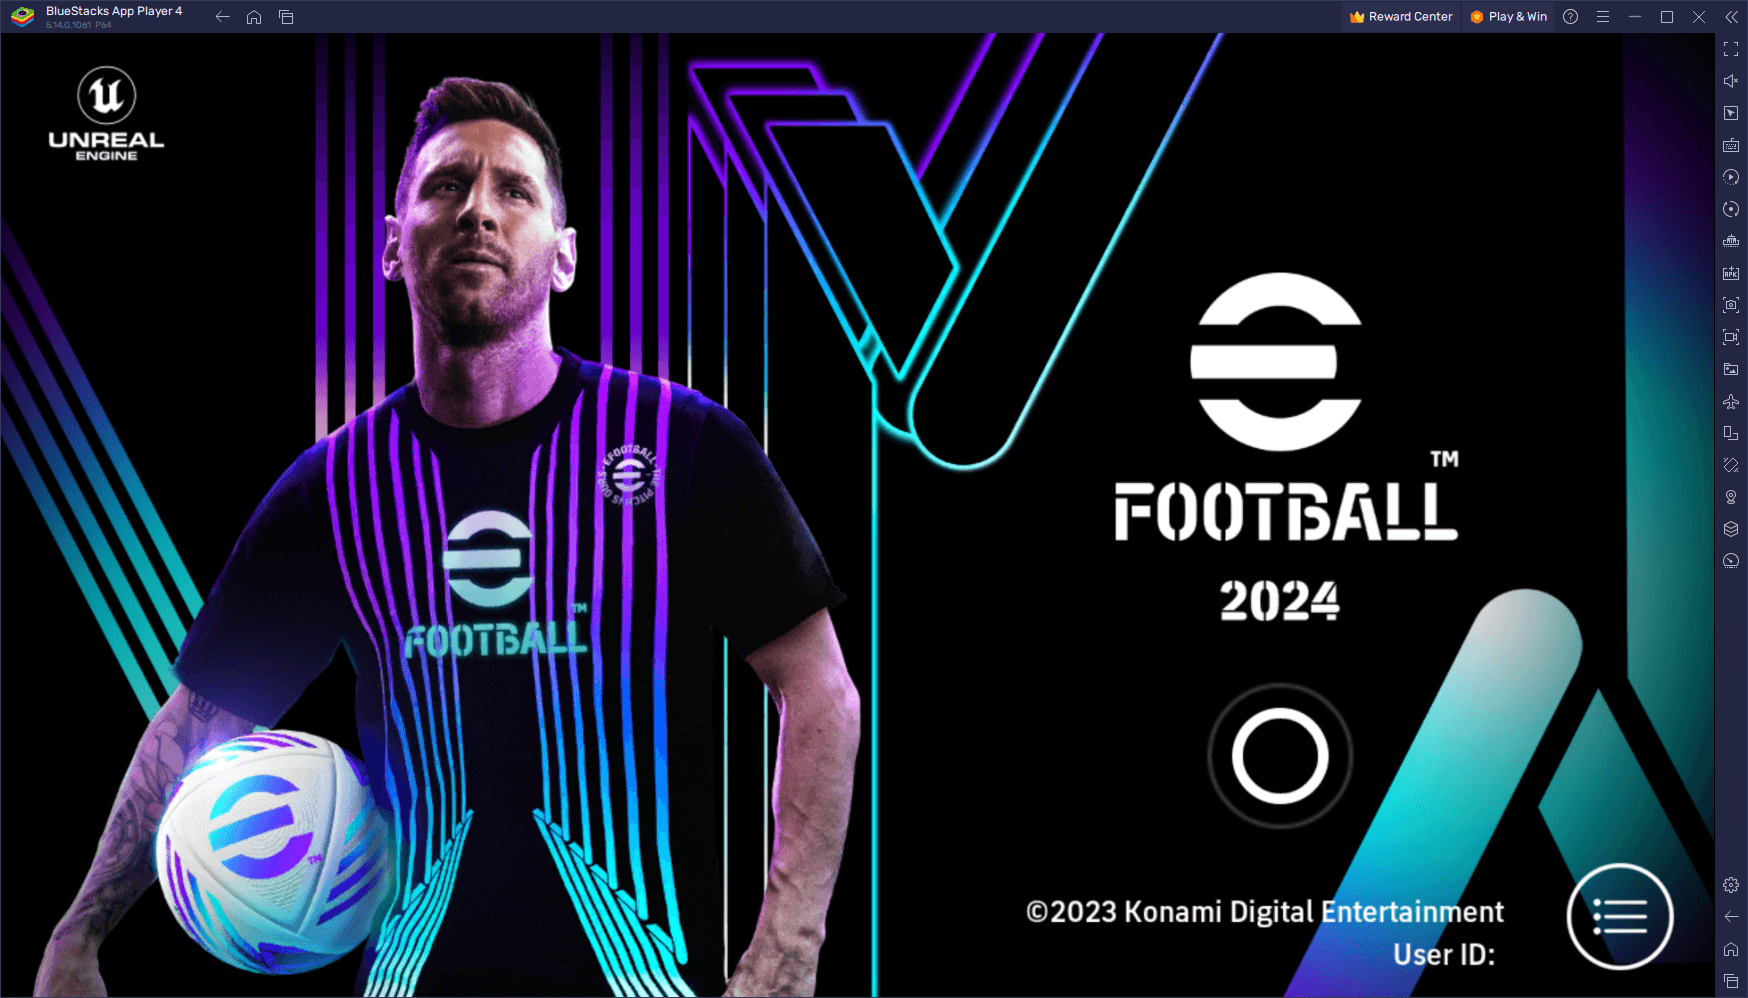 eFootball 2024 PC settings, how to download, and more